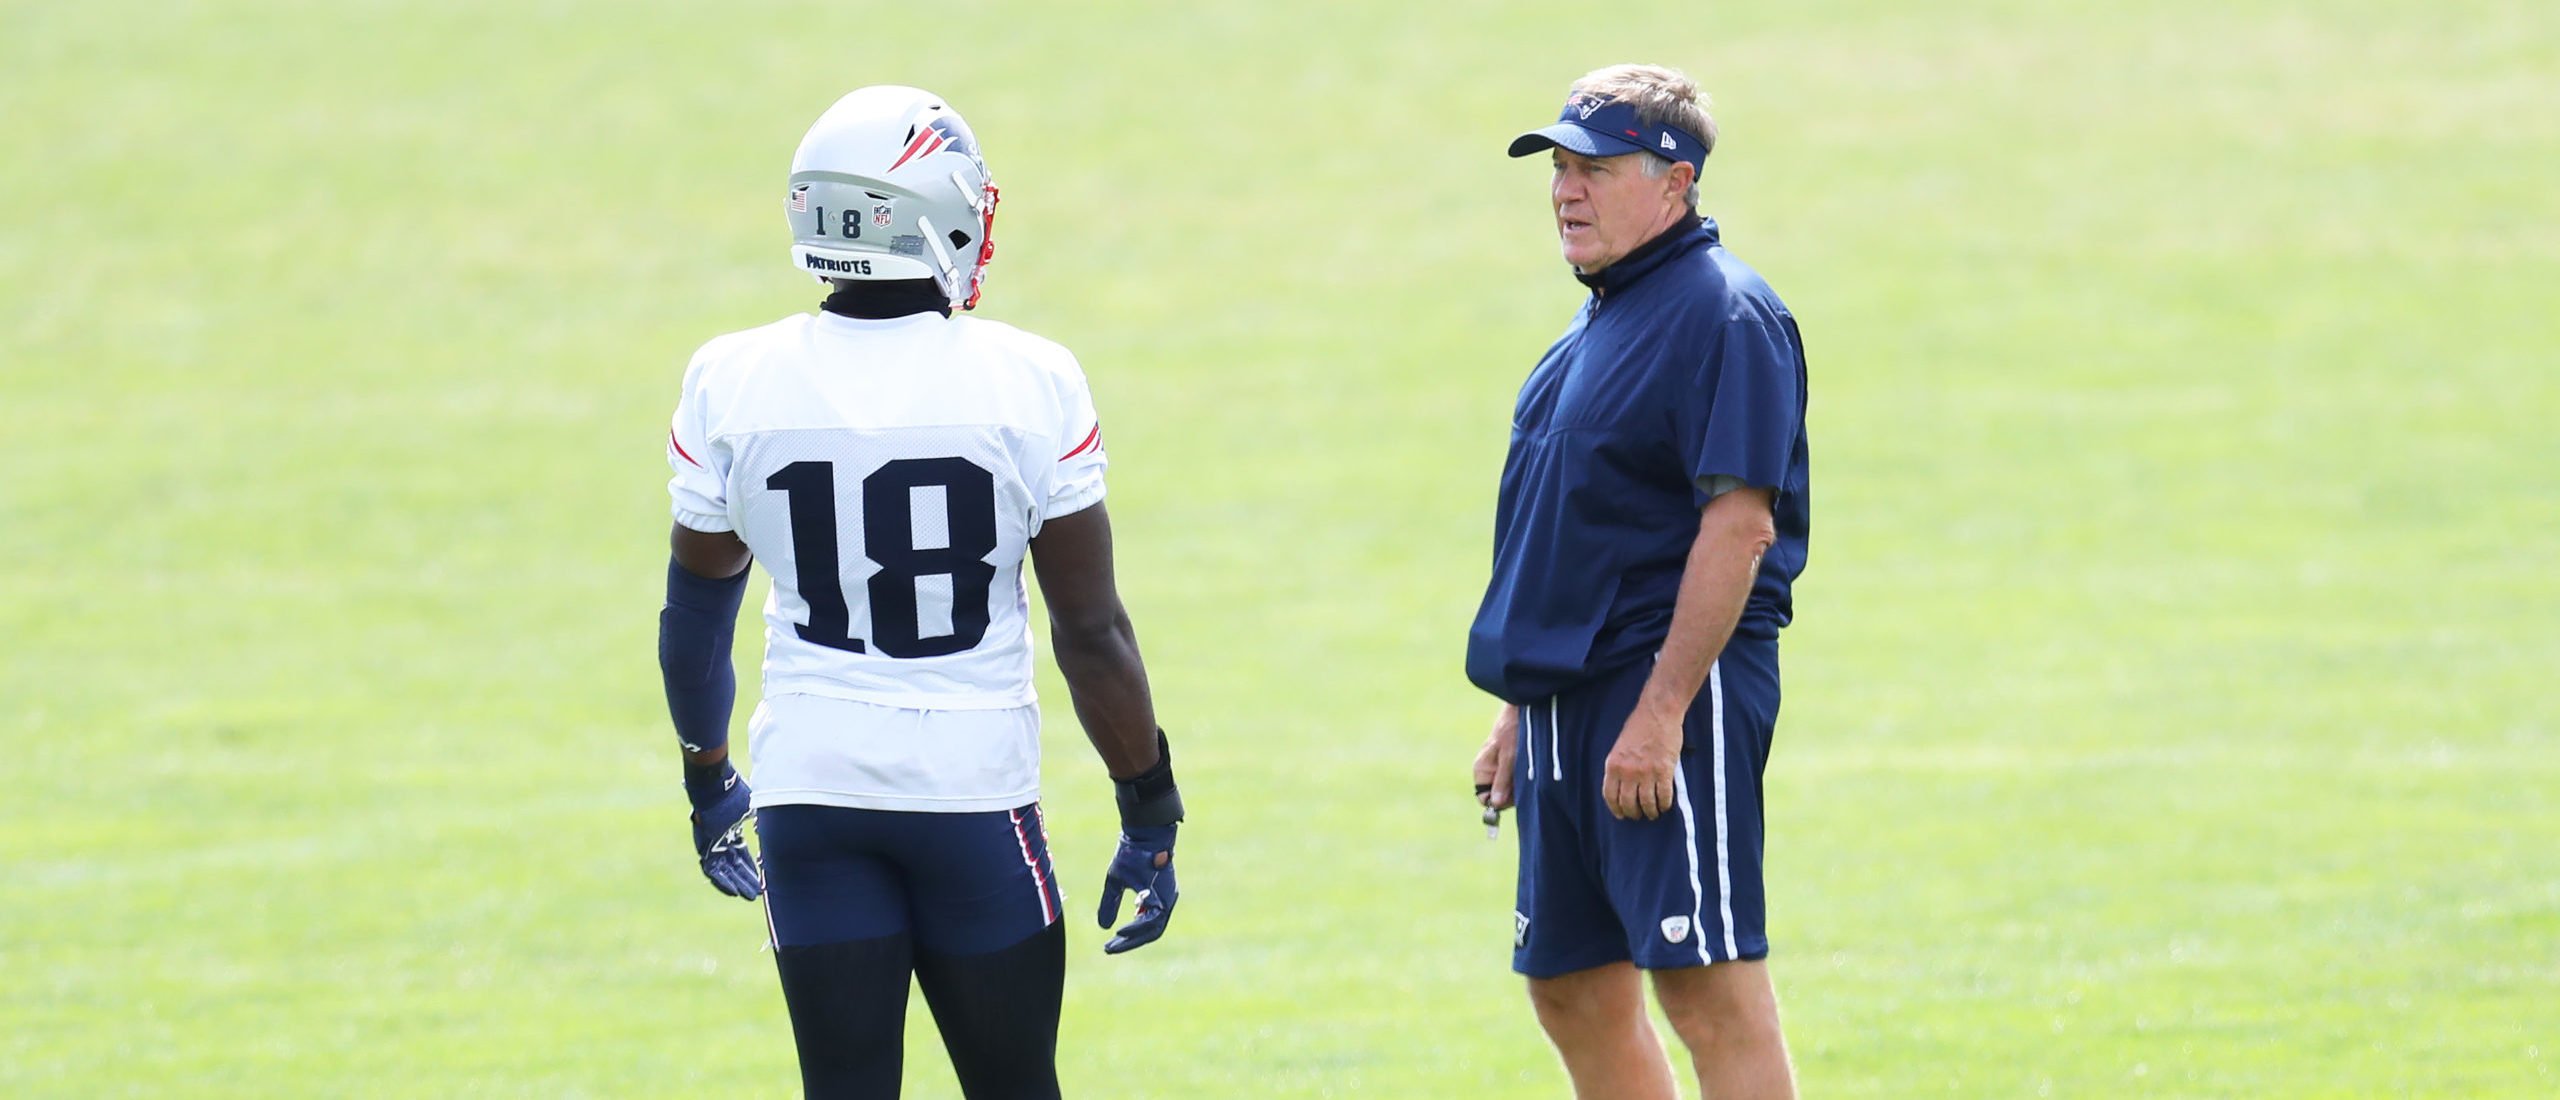 FOXBOROUGH, MASSACHUSETTS - AUGUST 26: Head coach Bill Belichick of the New England Patriots talks with Matthew Slater #18 during Patriots Training camp at Gillette Stadium on August 26, 2020 in Foxborough, Massachusetts. Maddie Meyer/Getty Images